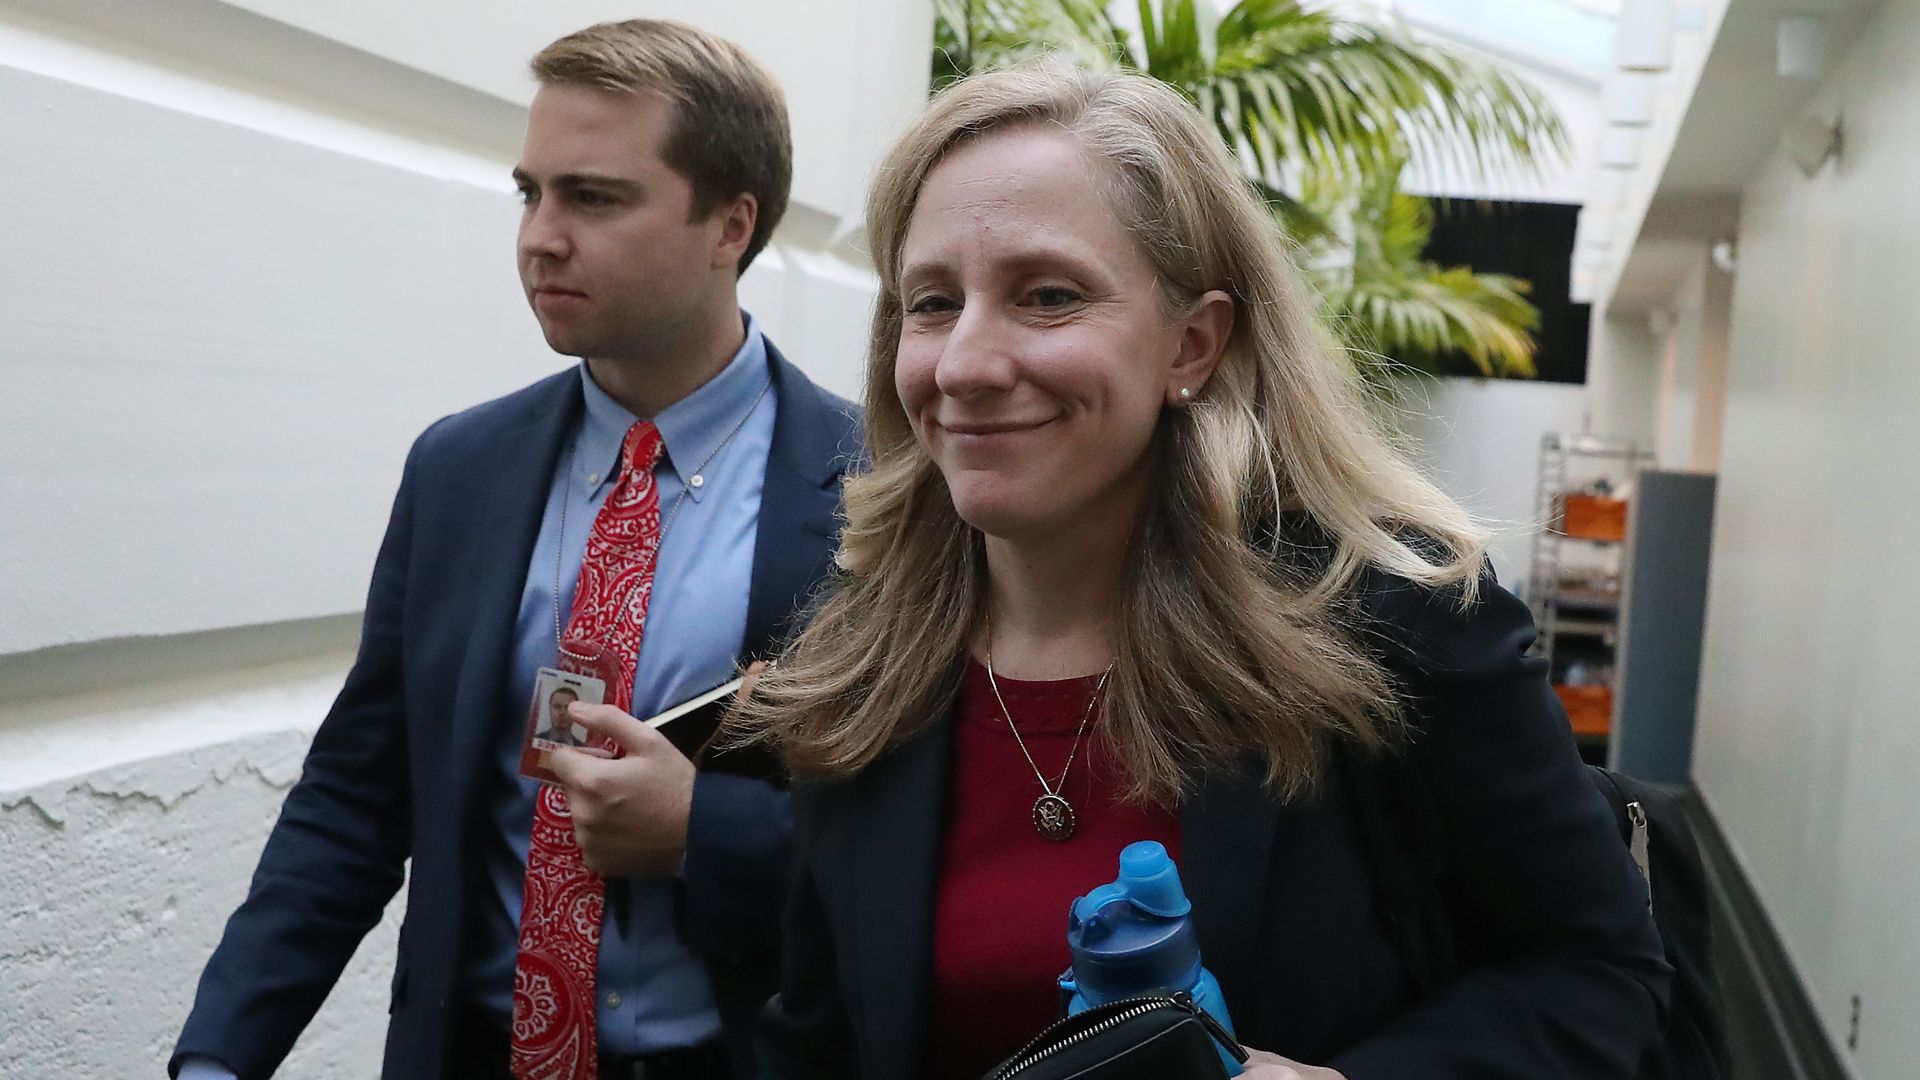 Rep. Abigail Spanberger is seen walking through the U.S. Capitol.